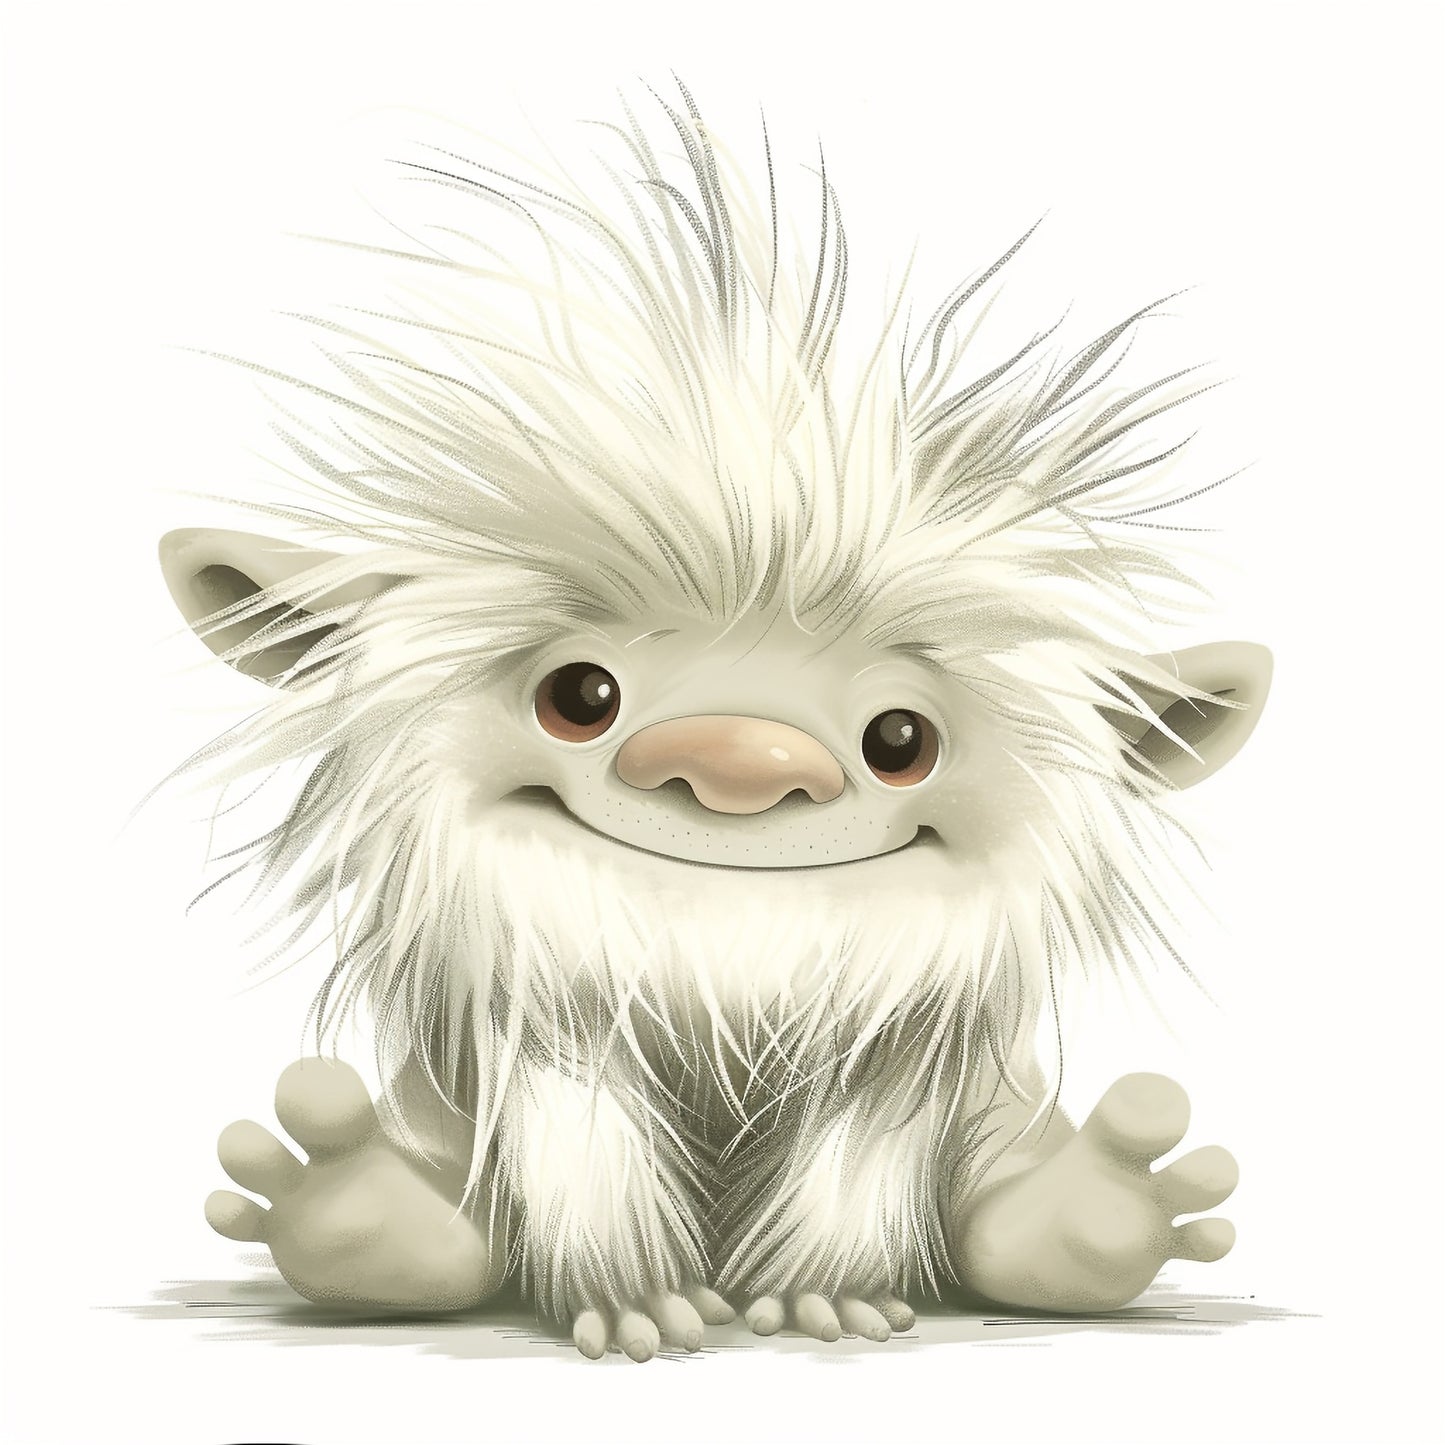 Adorable Whimsical Troll Illustration with Cute Smile